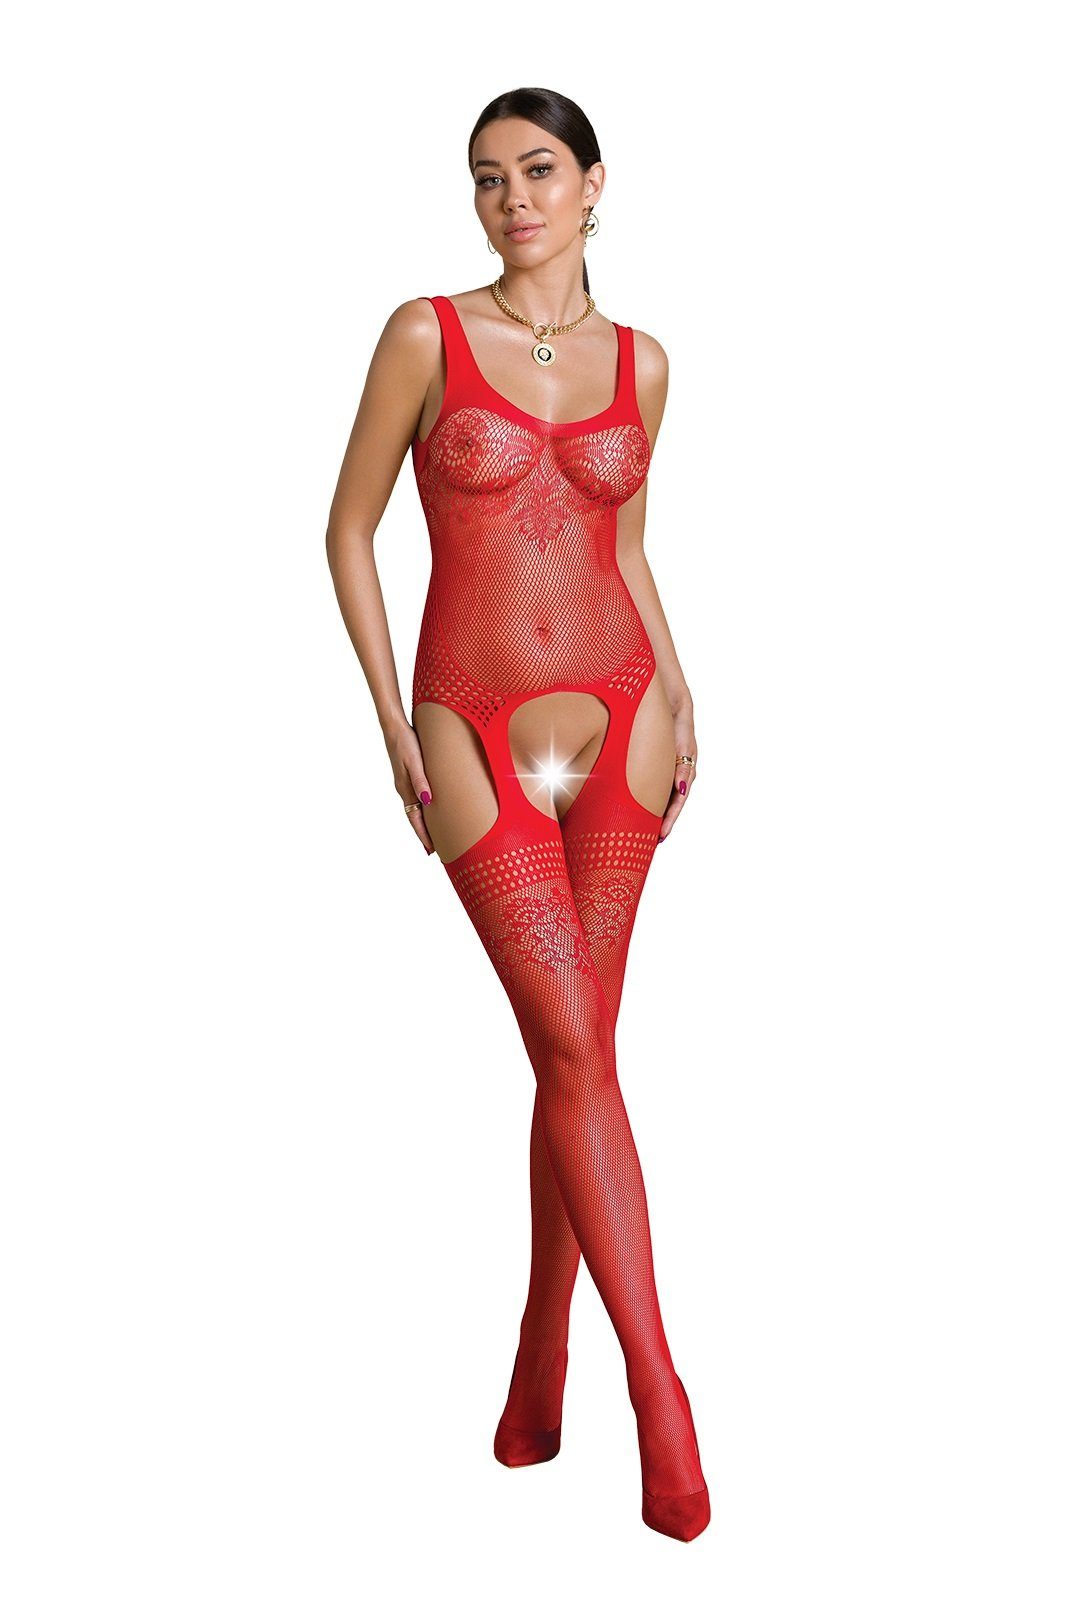 Passion Eco Collection Passion Catsuit Bodystocking ouvert rot Netz transparent 20 St) DEN (1 Bodystocking